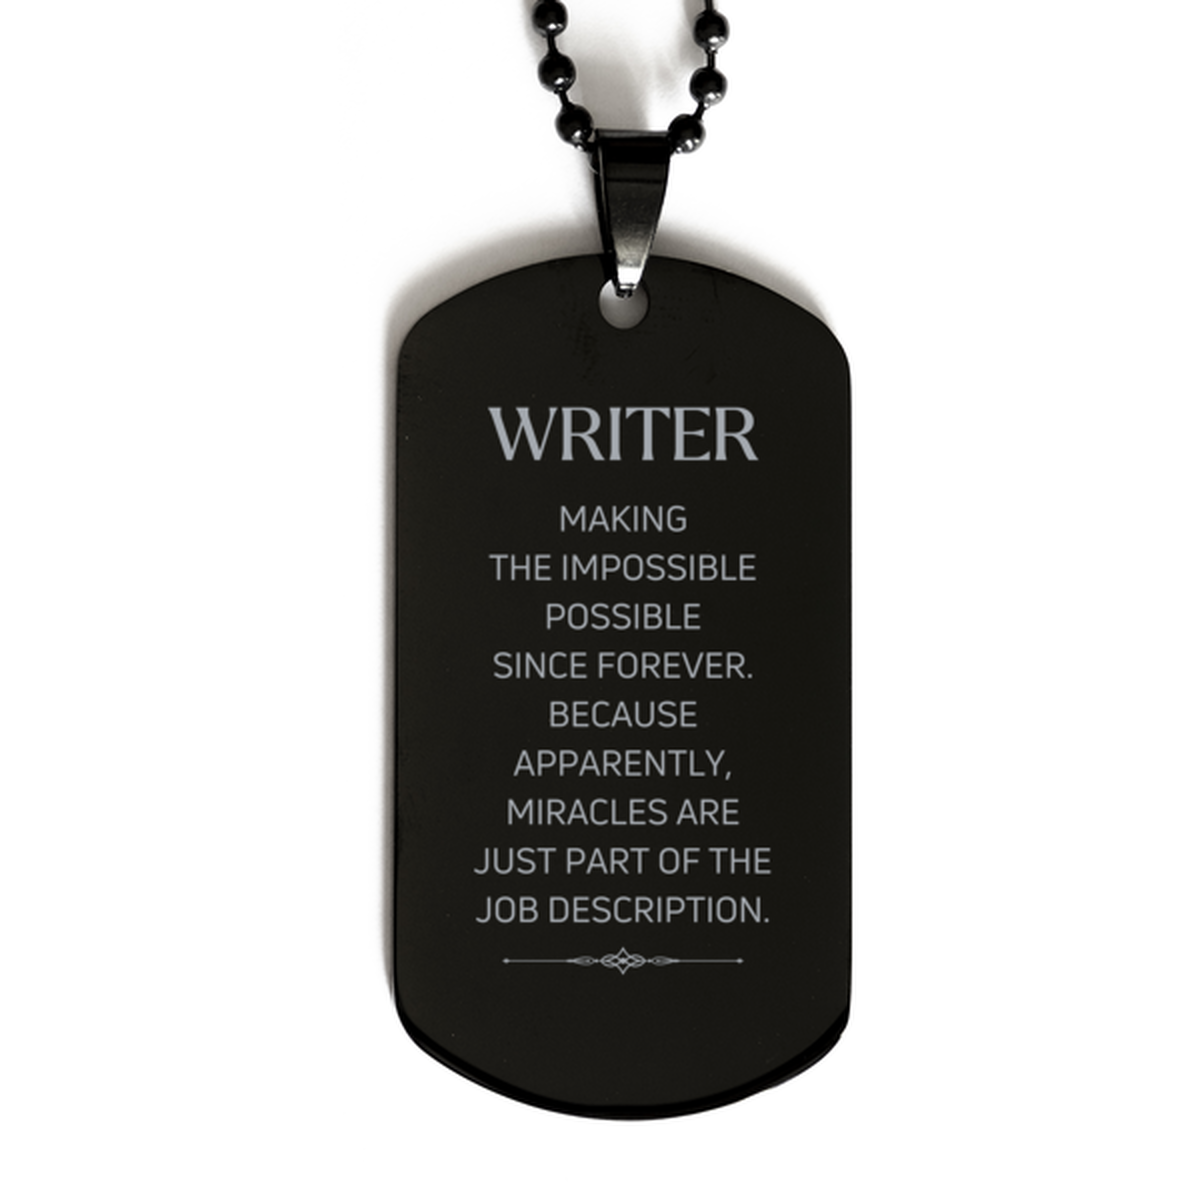 Funny Writer Gifts, Miracles are just part of the job description, Inspirational Birthday Black Dog Tag For Writer, Men, Women, Coworkers, Friends, Boss